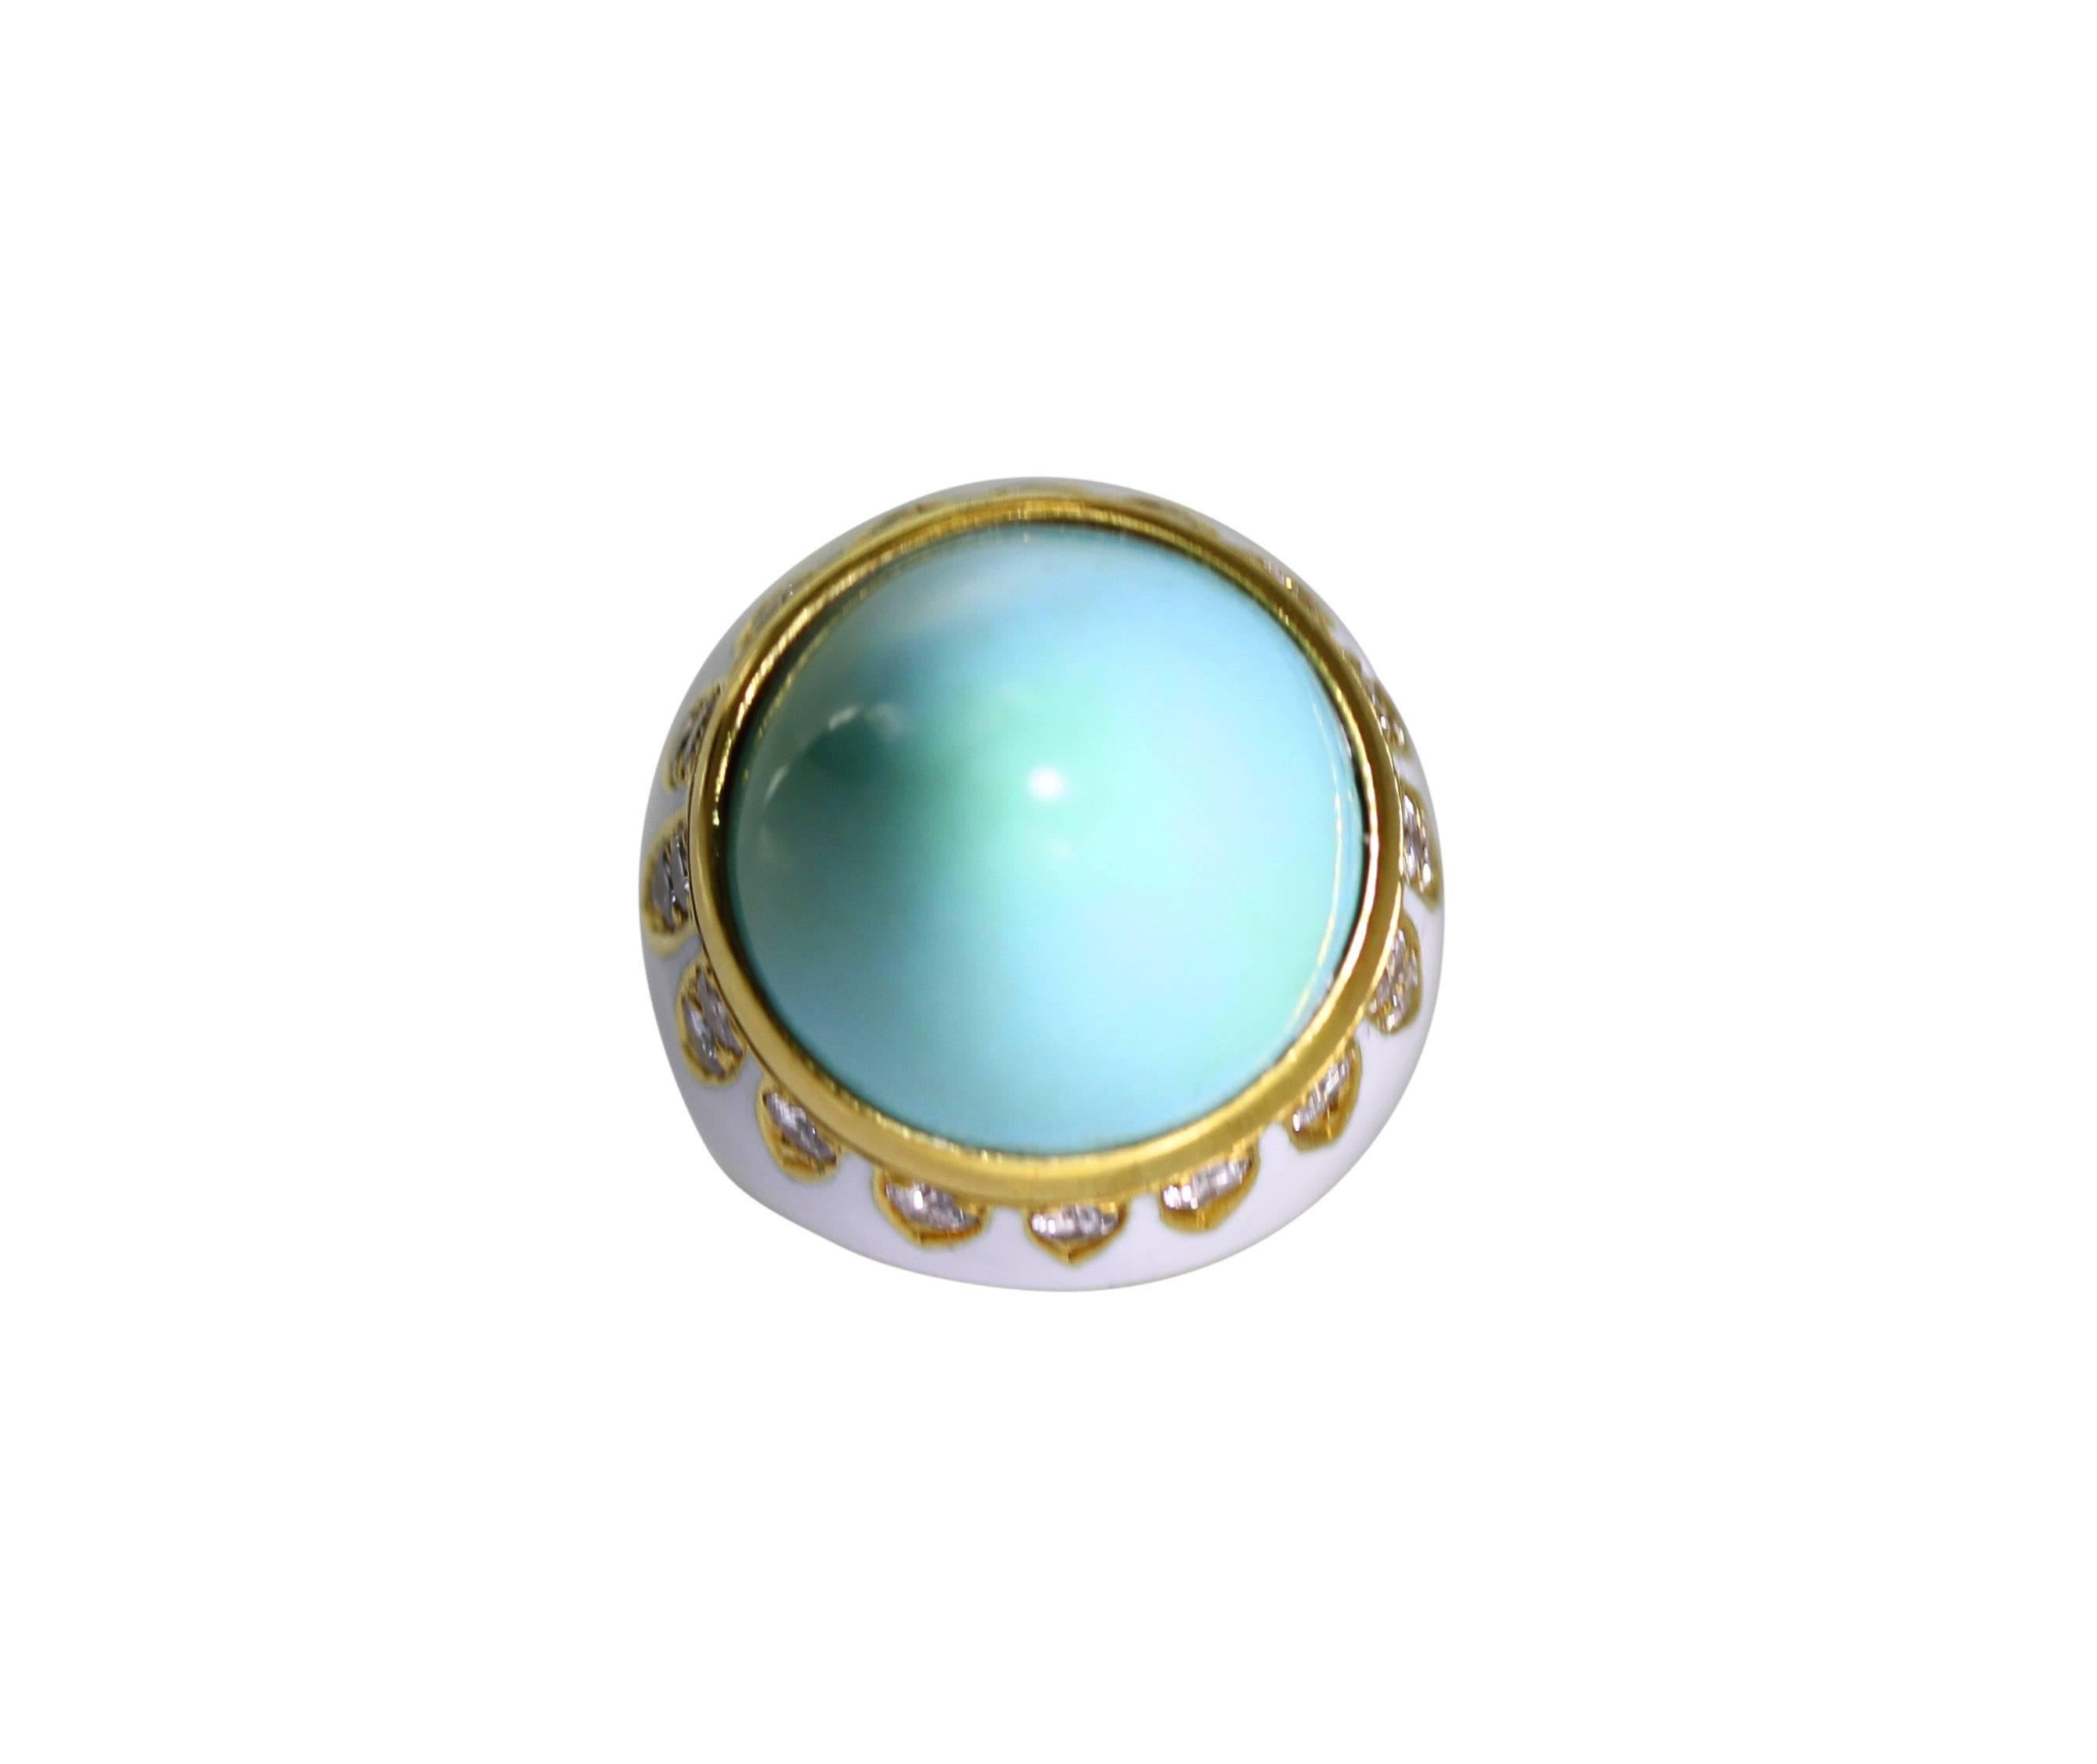 An 18 karat gold, turquoise, diamond and enamel ring, set in the center with an elongated cabochon turquoise segment measuring 17.65 by 16.0 mm., accented by 24 round diamonds weighing approximately 1.20 carats,  applied with white enamel, measuring